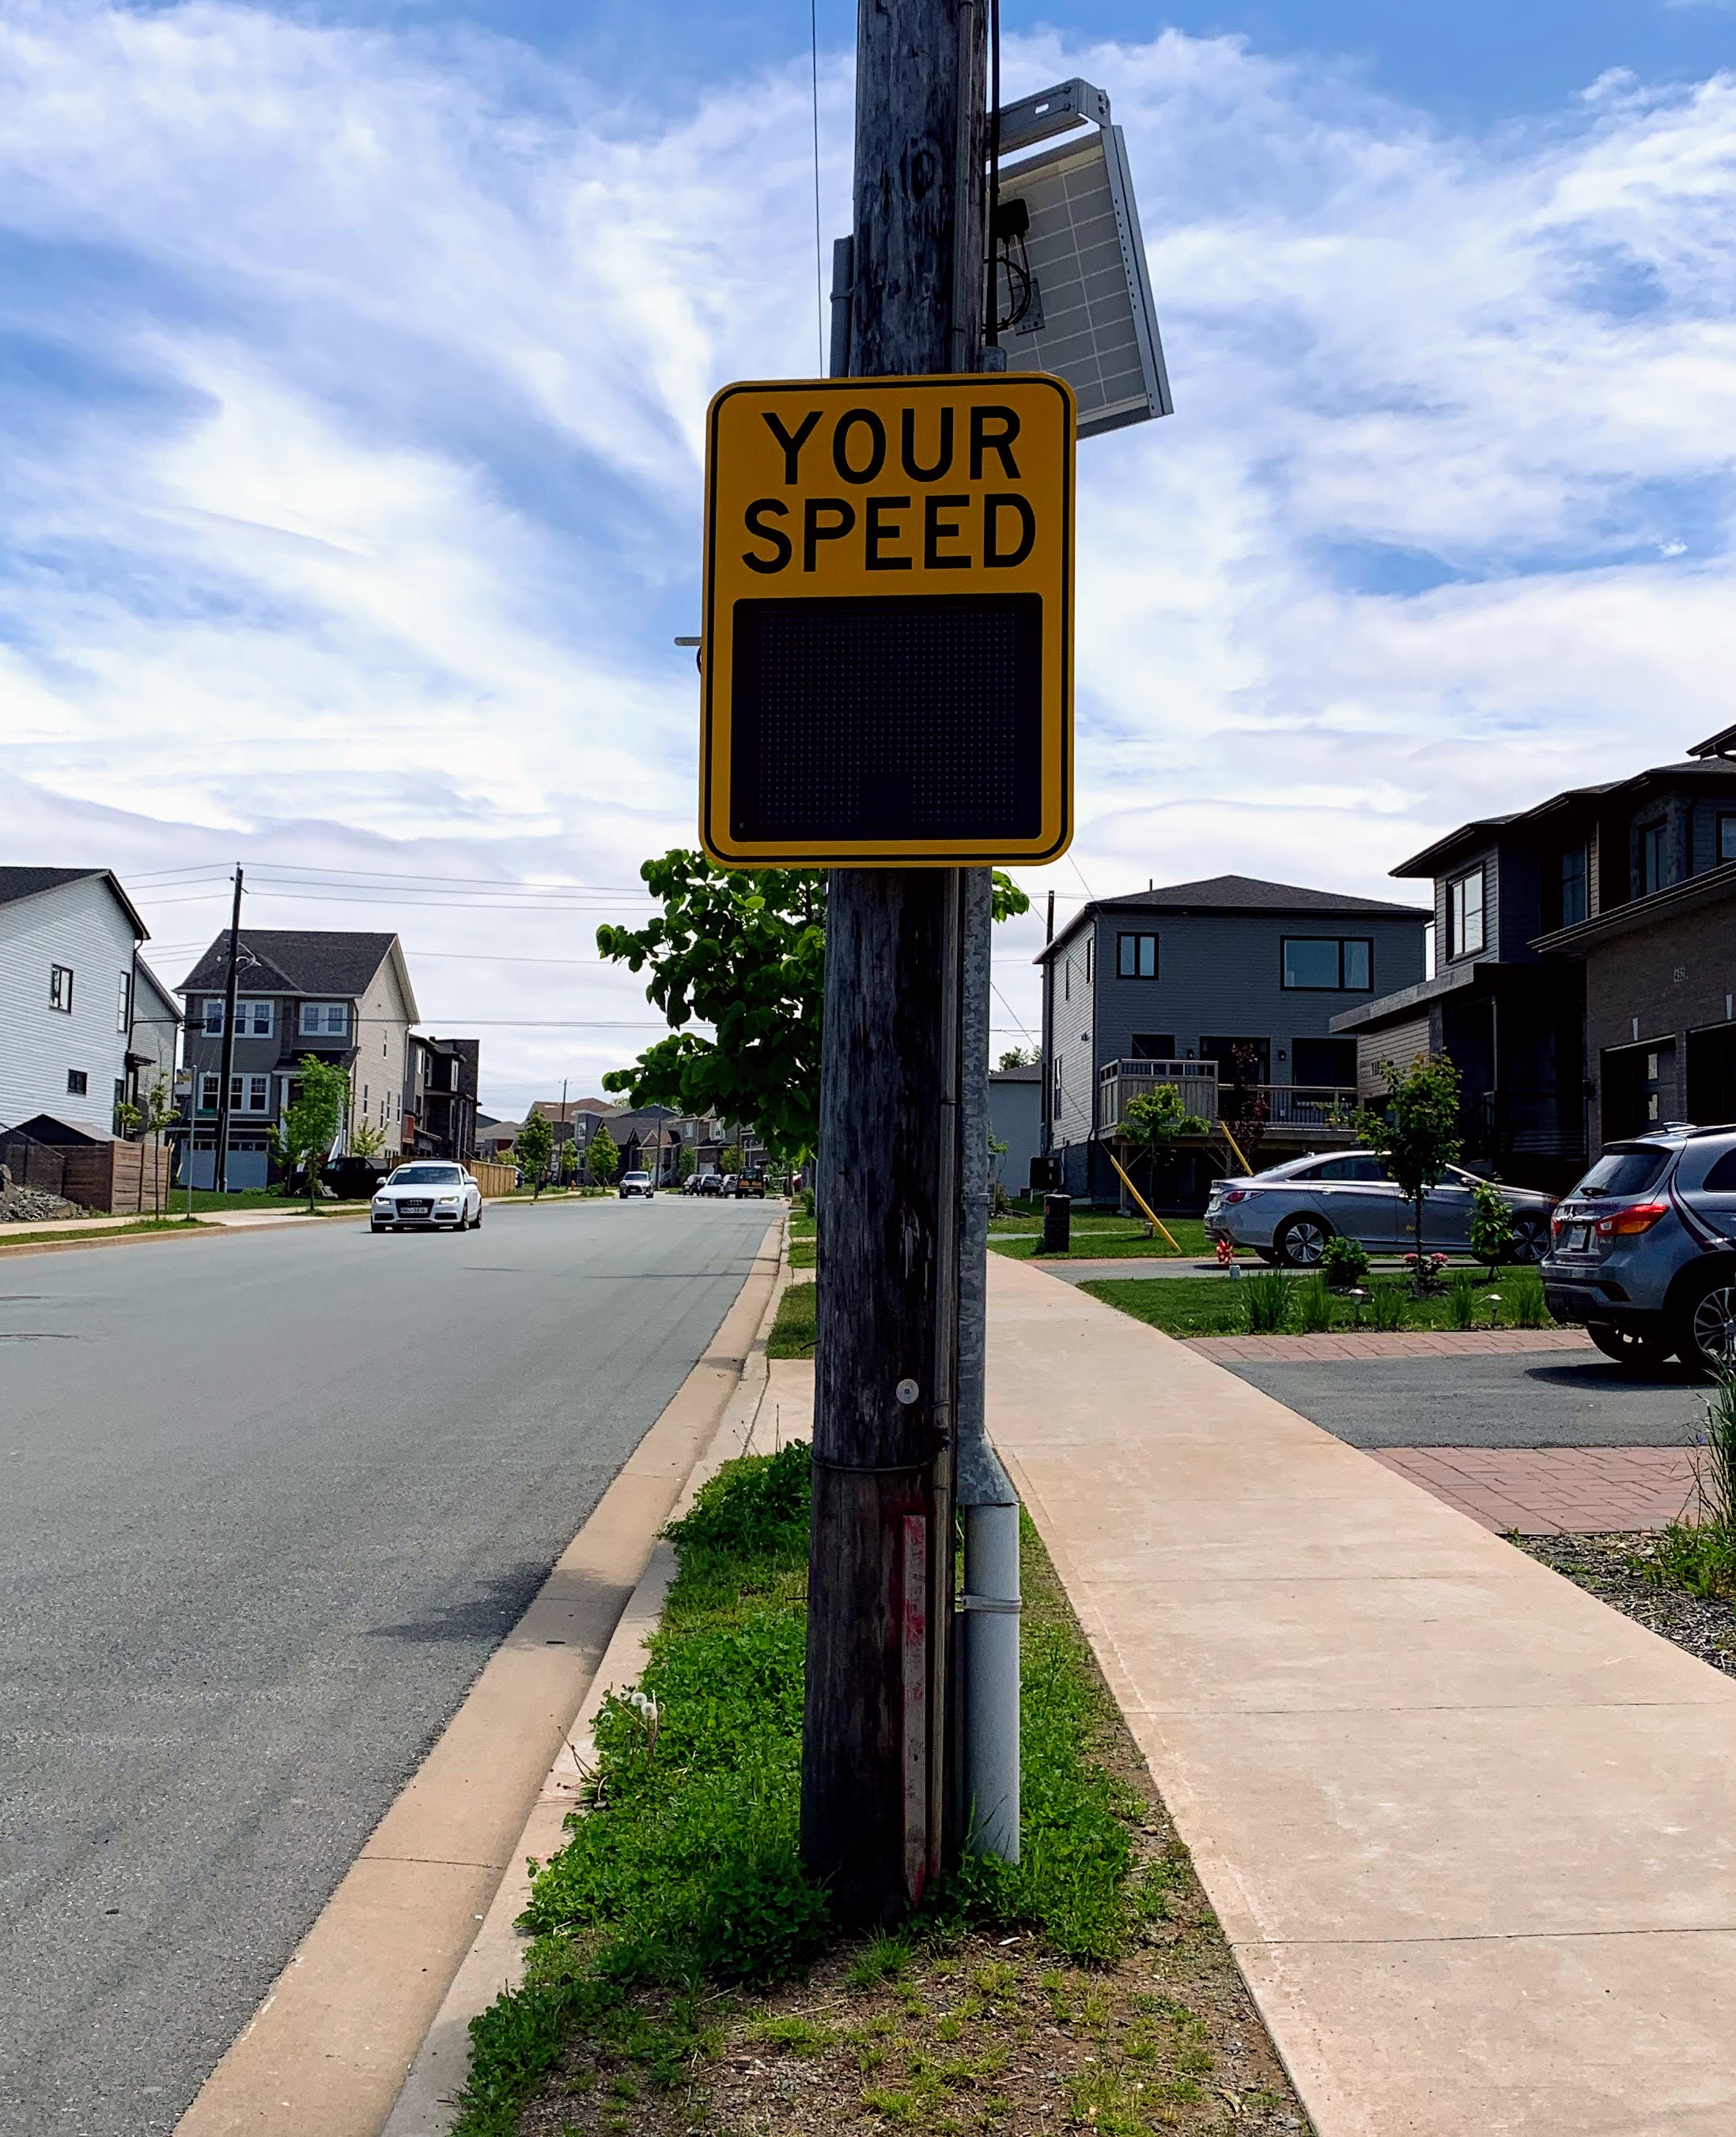 Photograph of a Speed Display Sign